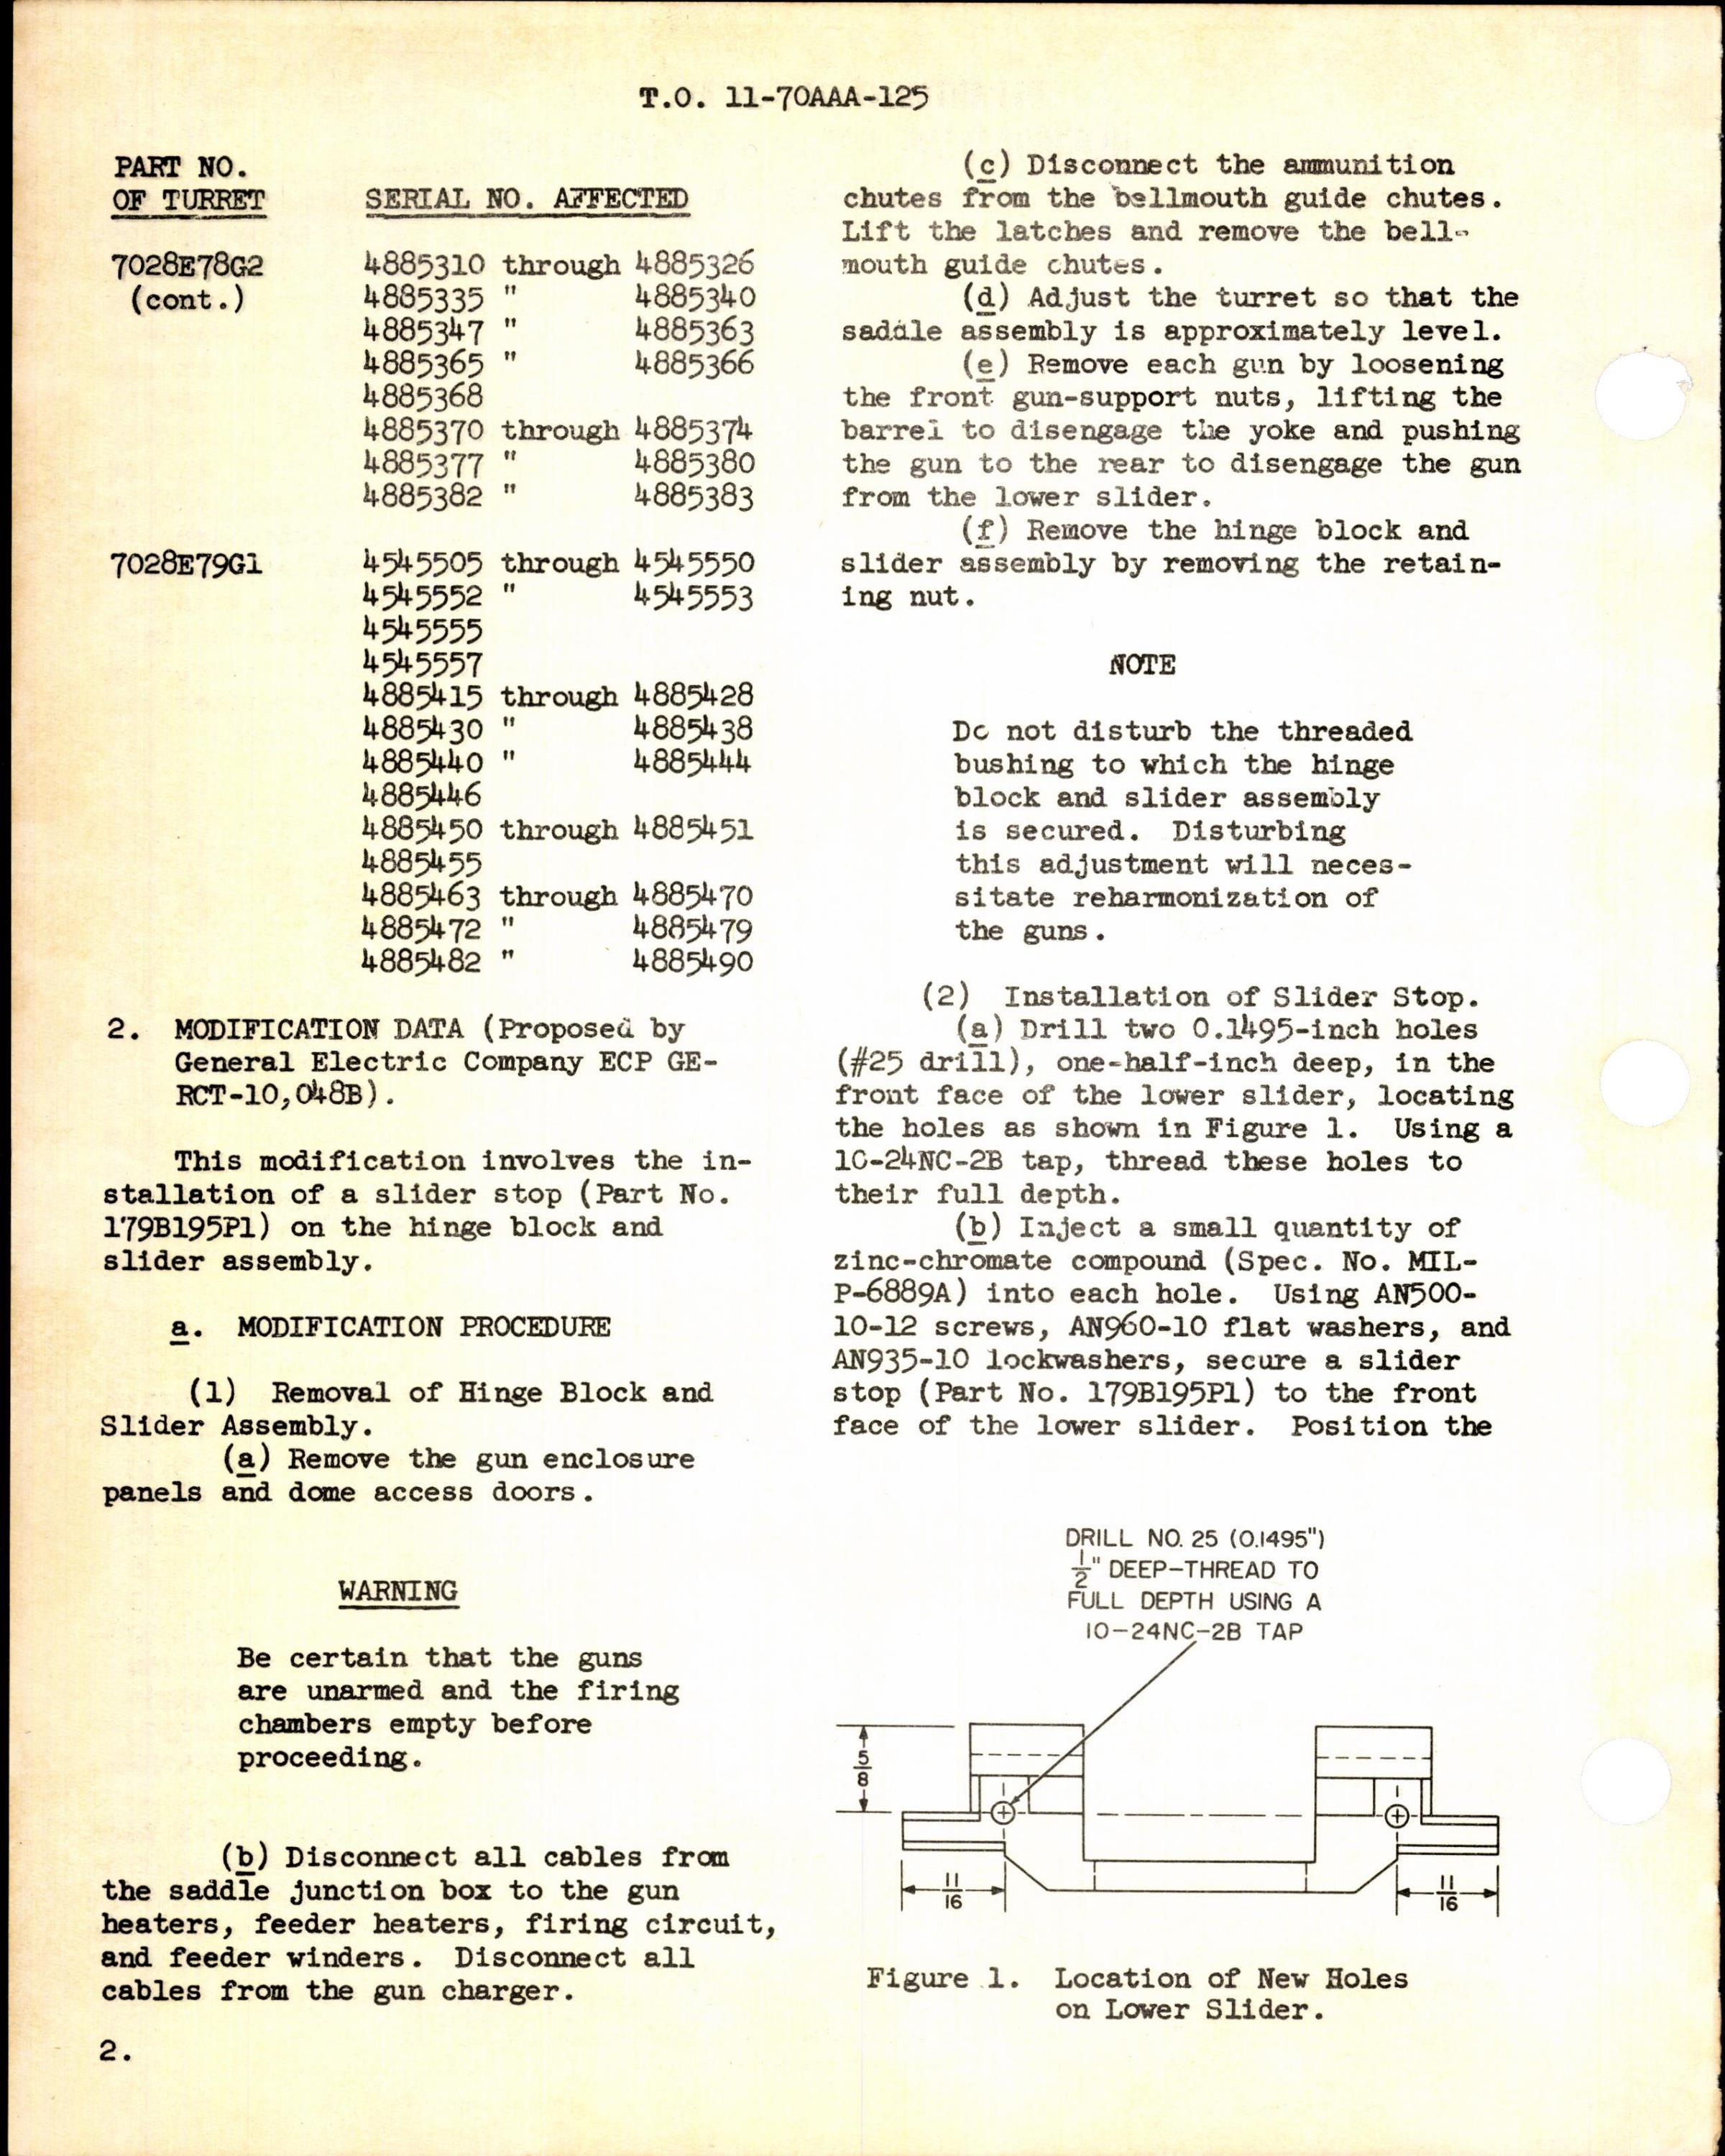 Sample page 2 from AirCorps Library document: Modification of Block and Slider Assembly for B-36 Fire Control System